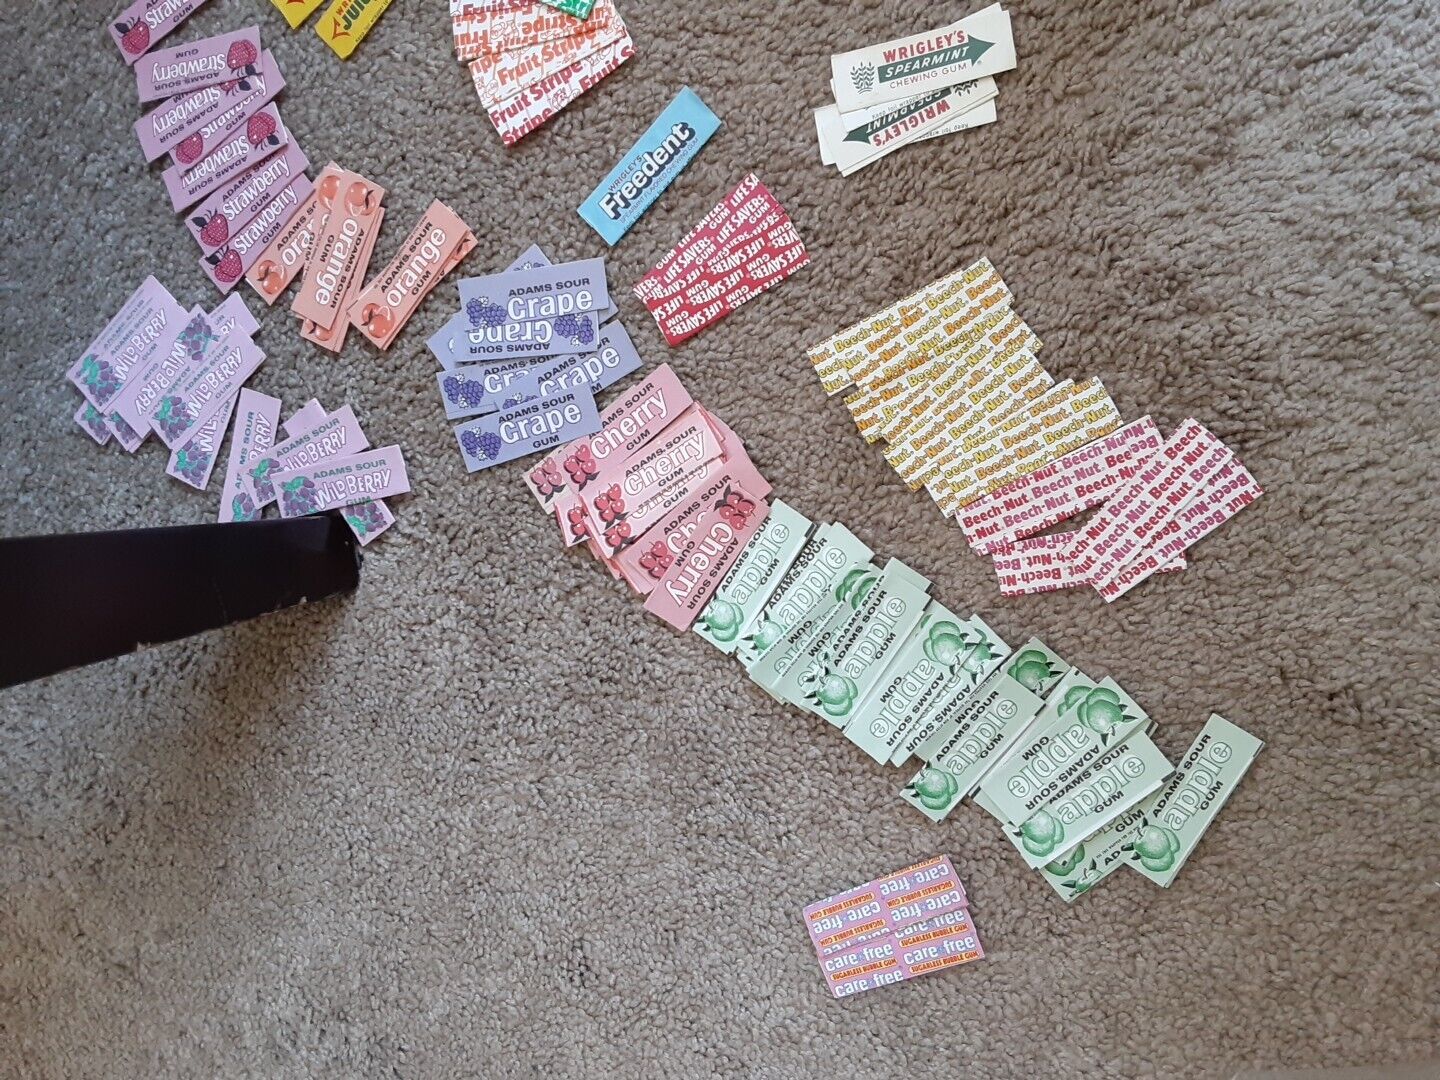 Rare Vintage Lot of Wrigley’s Adams Fun Stripes And MORE Gum Wrappers over 145..